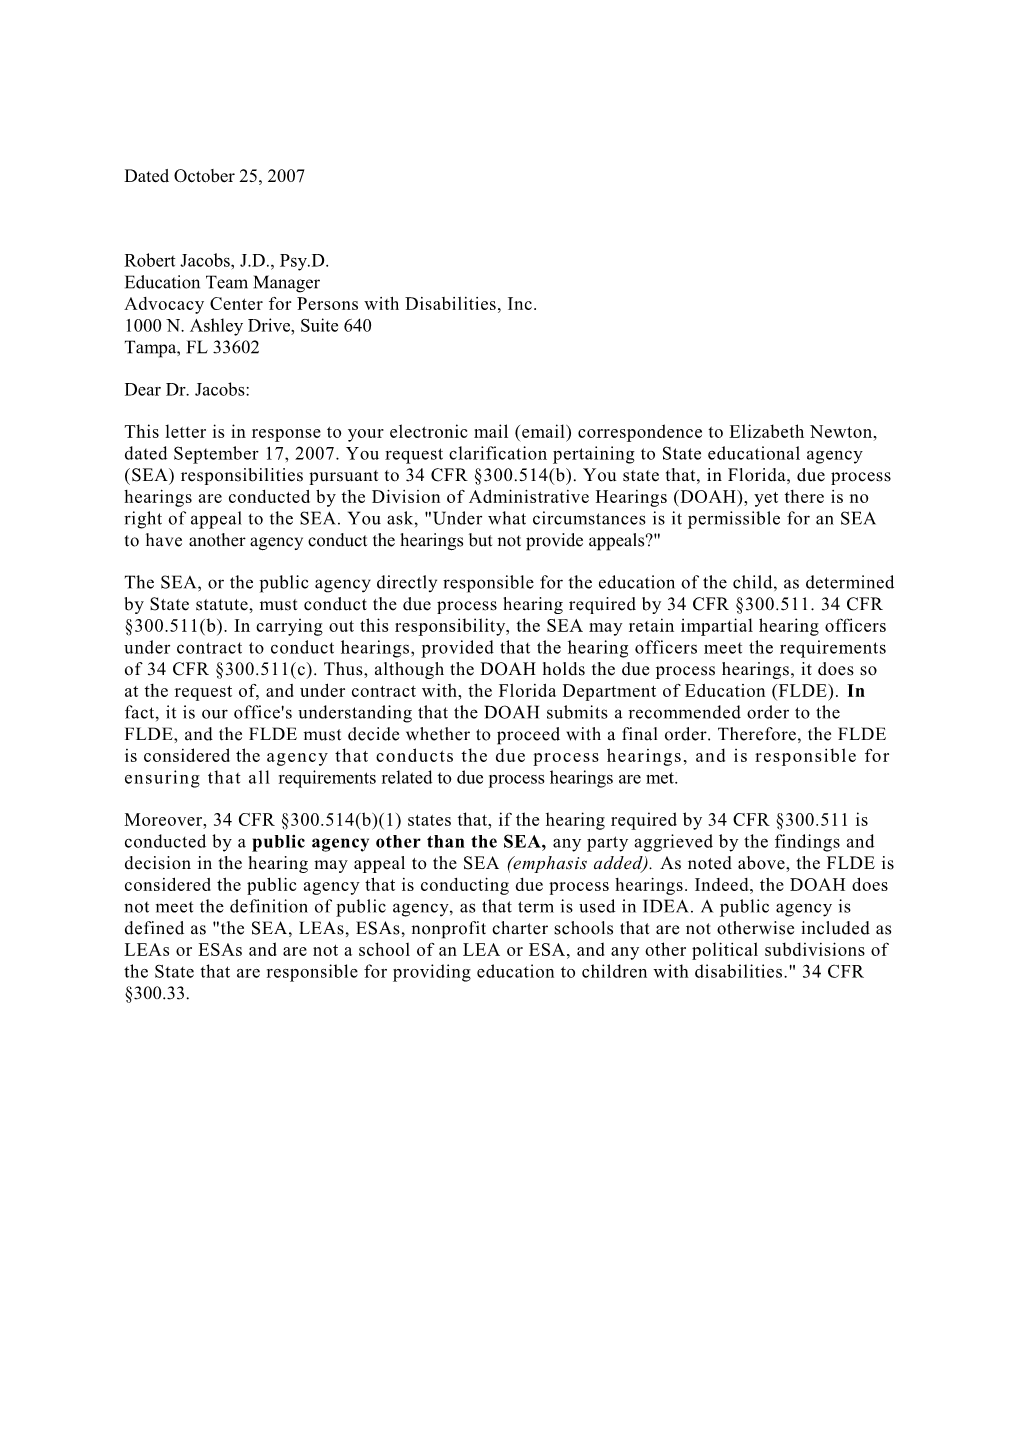 Jacobs Letter Dated 10/25/07 Re: Impartial Due Process Hearing (MS Word)